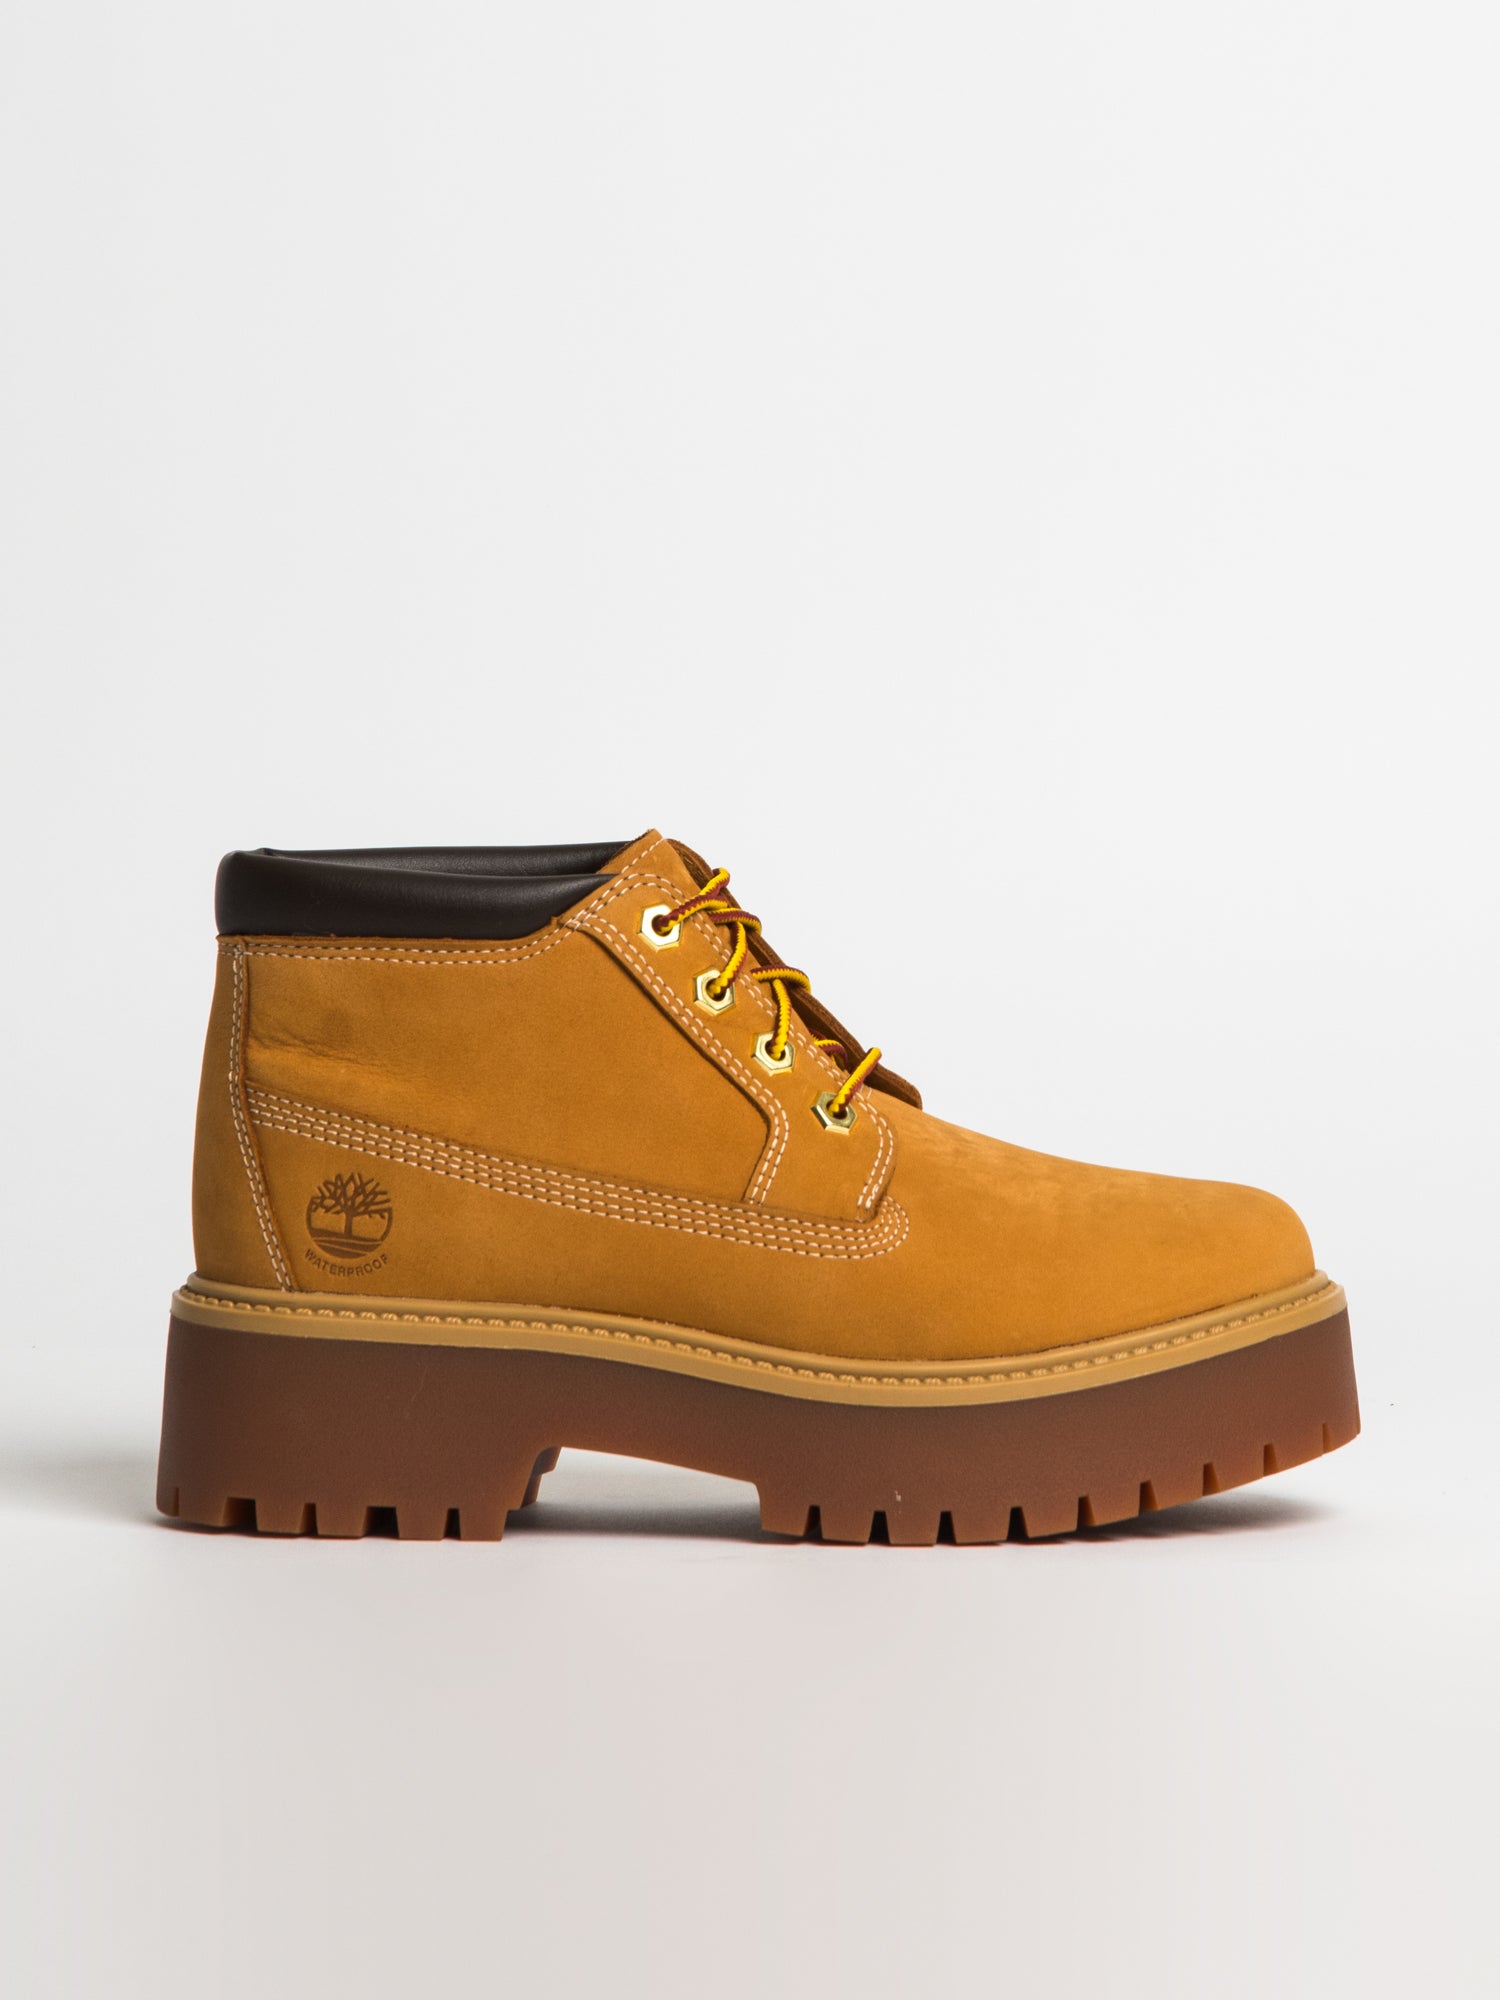 Womens Heeled Boots | Timberland Boots | Timberland Shoes| OFFICE